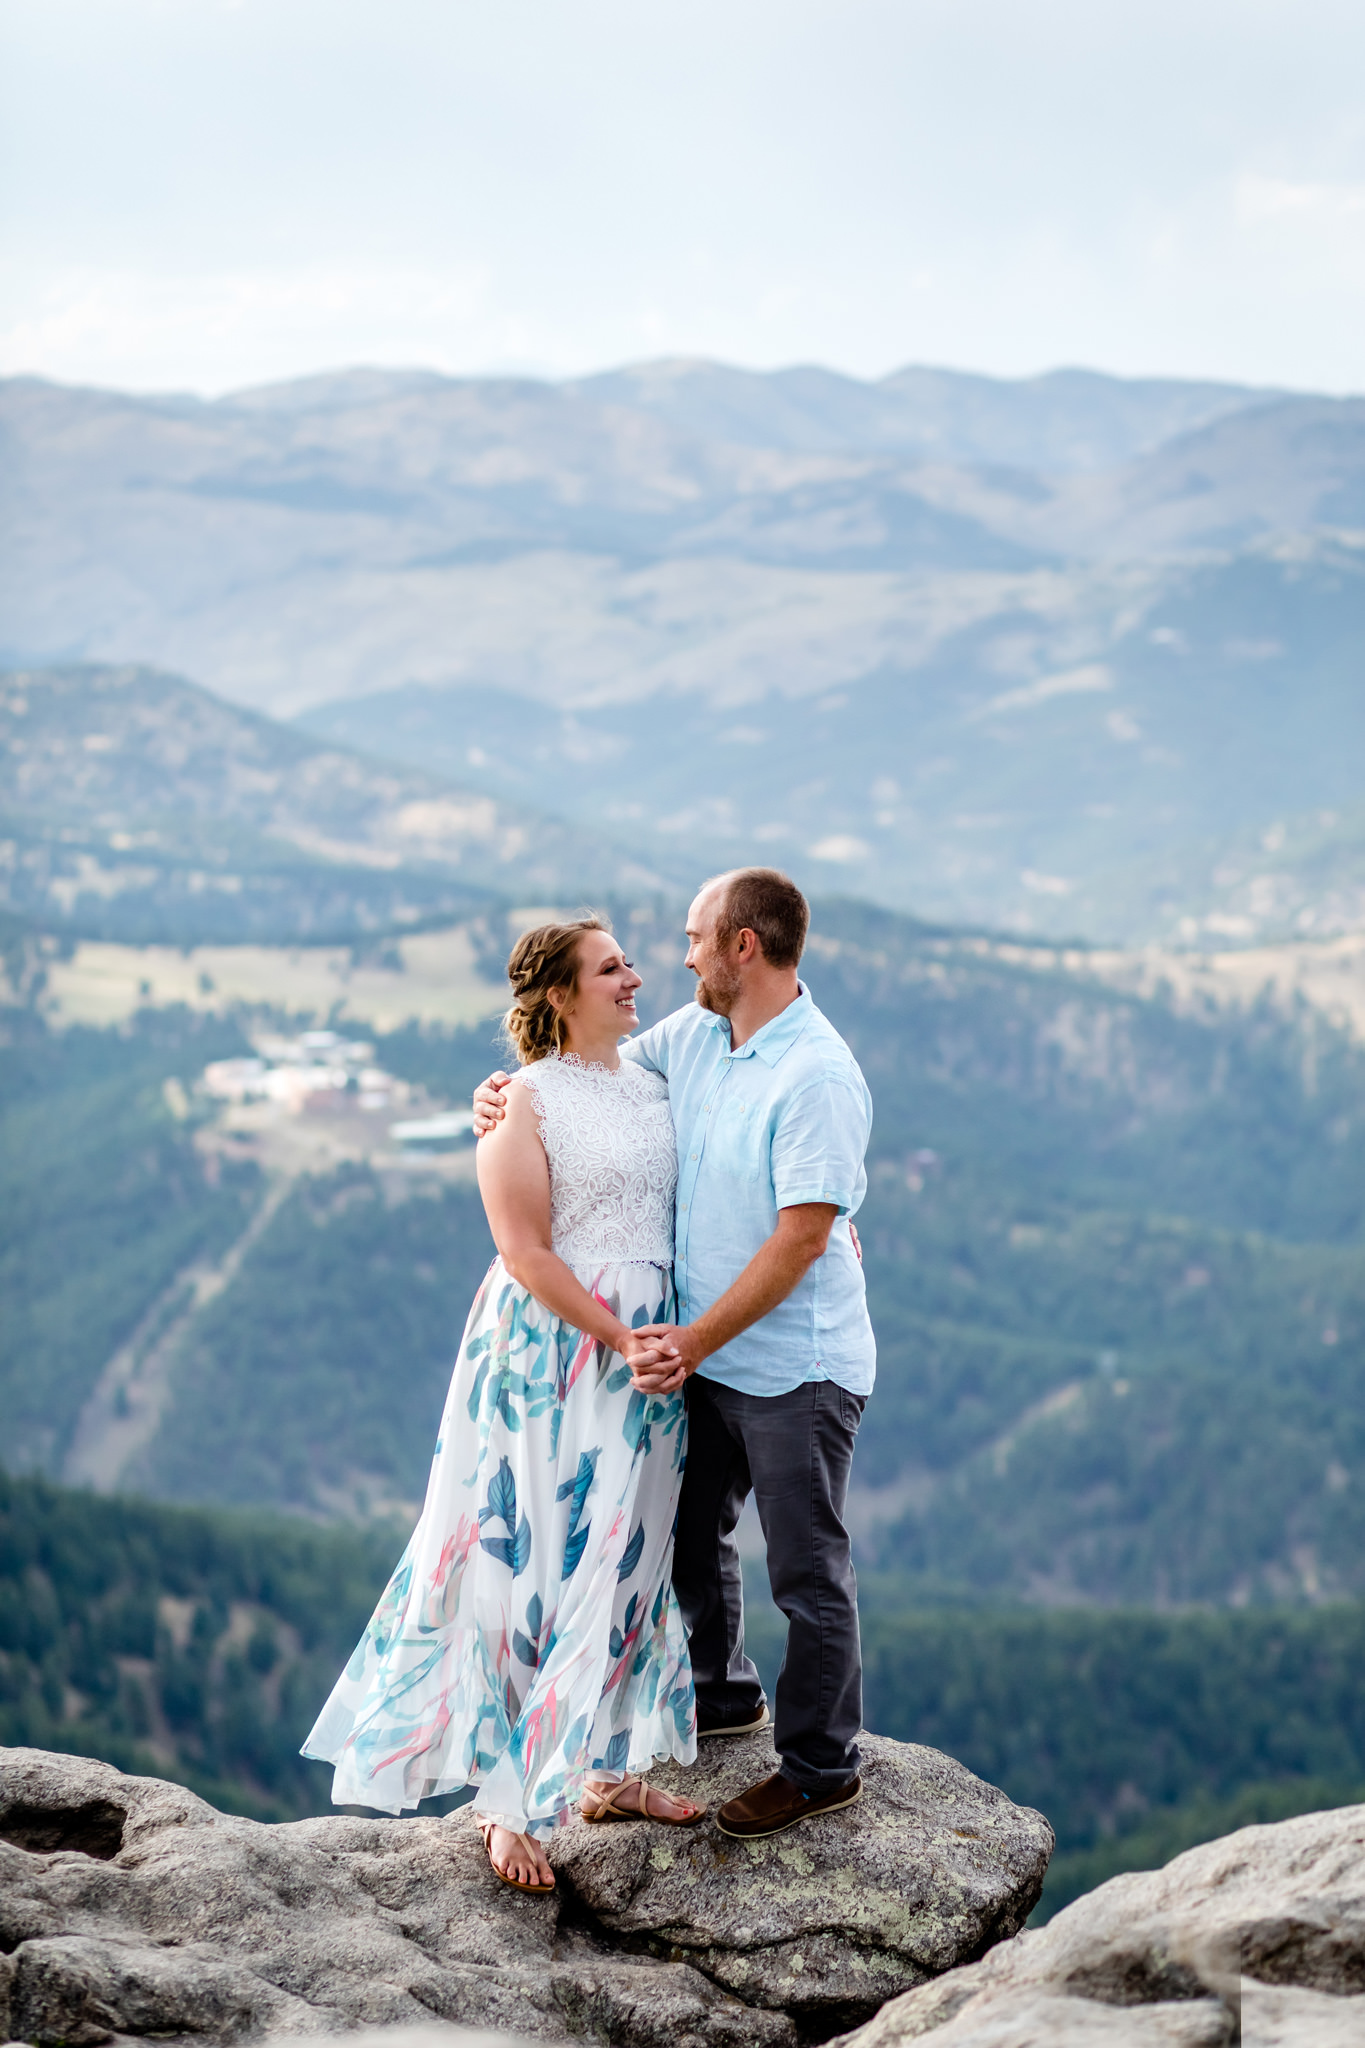 Lauren & Taylor standing at Lost Gulch Overlook with beautiful mountain view behind them. Mountain Fall Engagement Session by Colorado Engagement Photographer, Jennifer Garza. Colorado Fall Engagement, Colorado Fall Engagement Photos, Fall Engagement Photography, Fall Engagement Photos, Colorado Engagement Photographer, Colorado Engagement Photography, Mountain Engagement Photographer, Mountain Engagement, Mountain Engagement Photos, Rocky Mountain Bride, Wedding Inspo, Wedding Season, Colorado Wedding, Colorado Bride, Bride to Be, Couples Goals